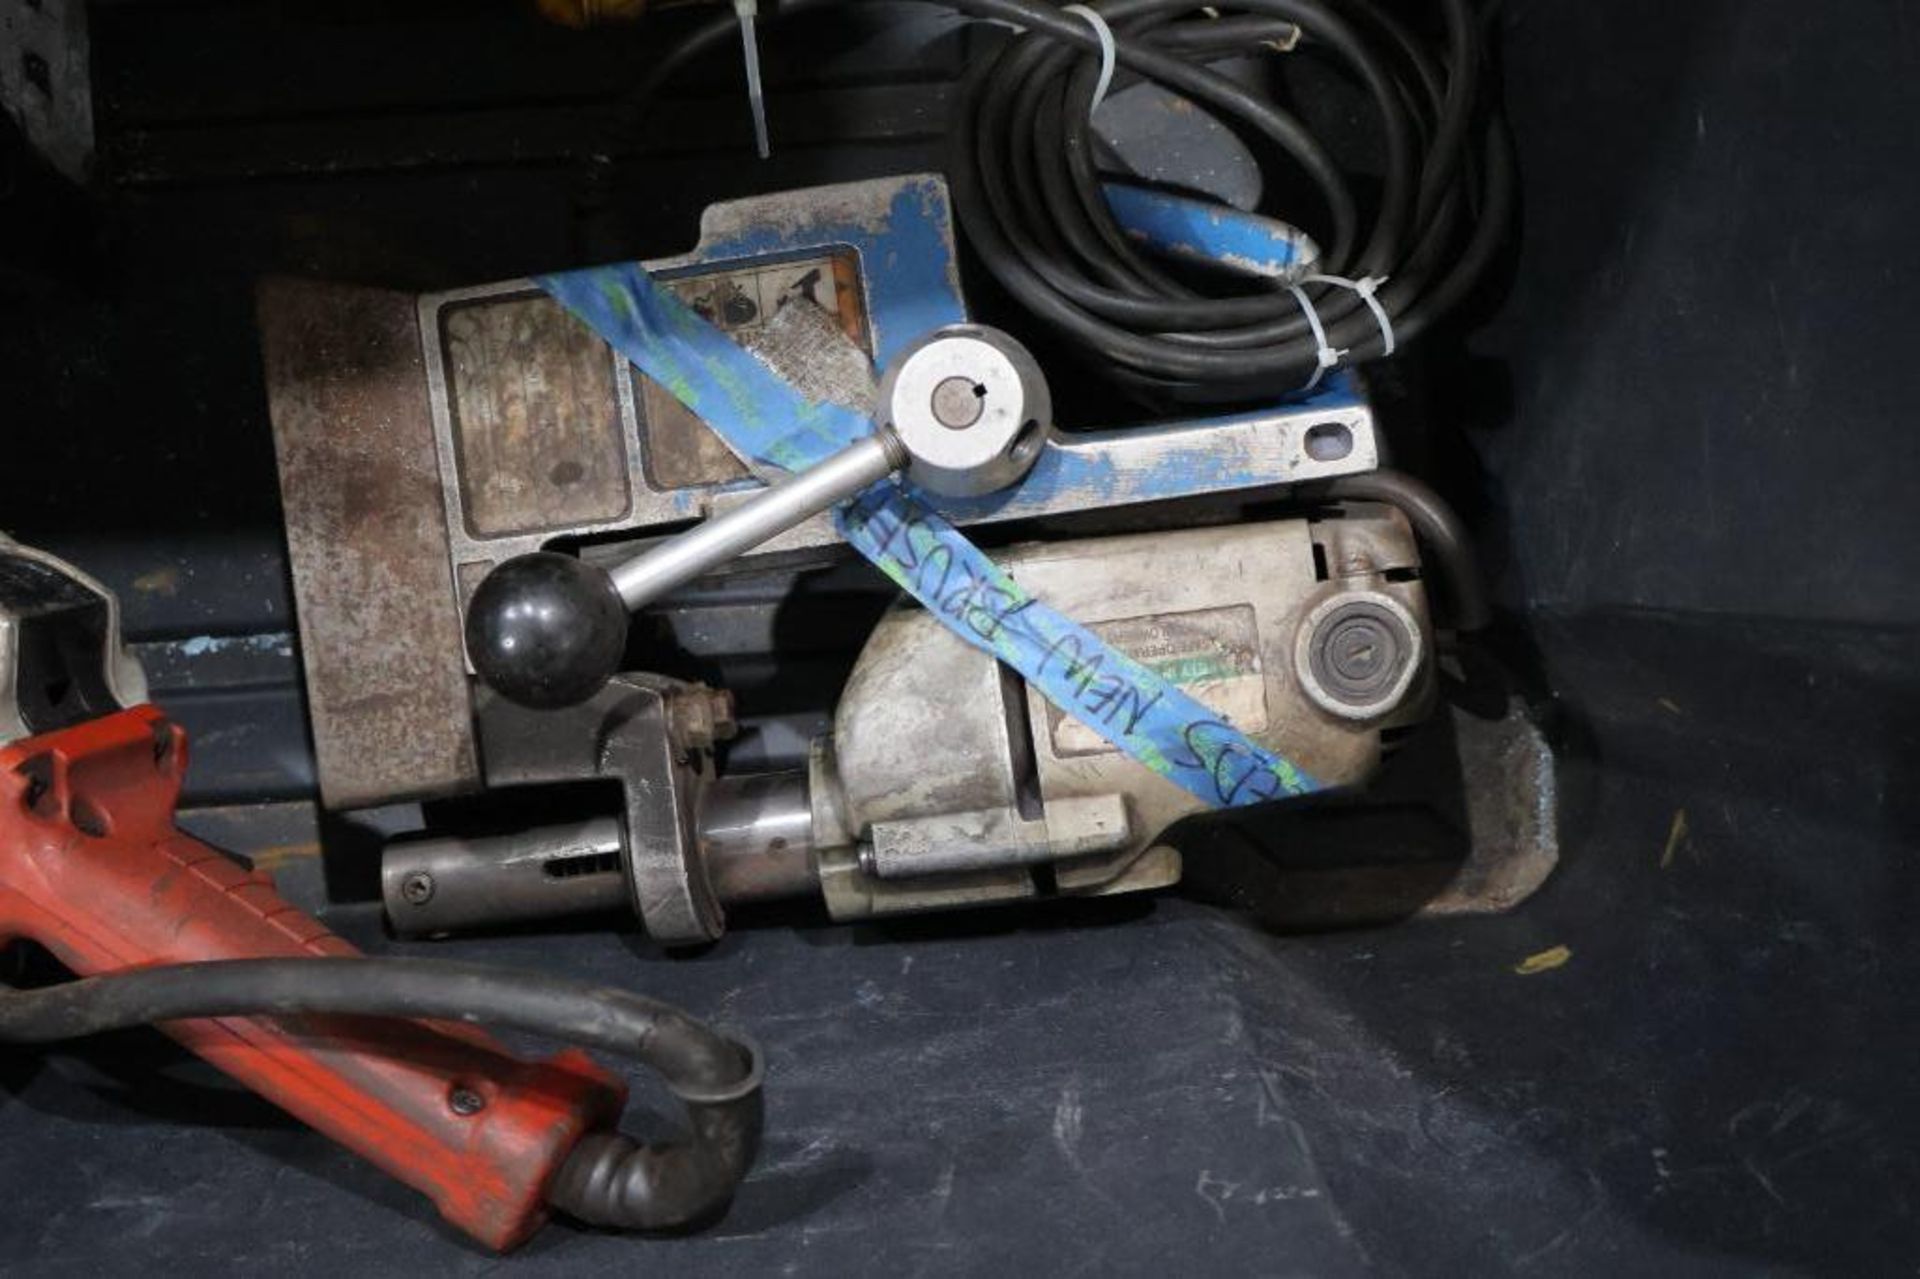 Non operational power tools - Image 3 of 7